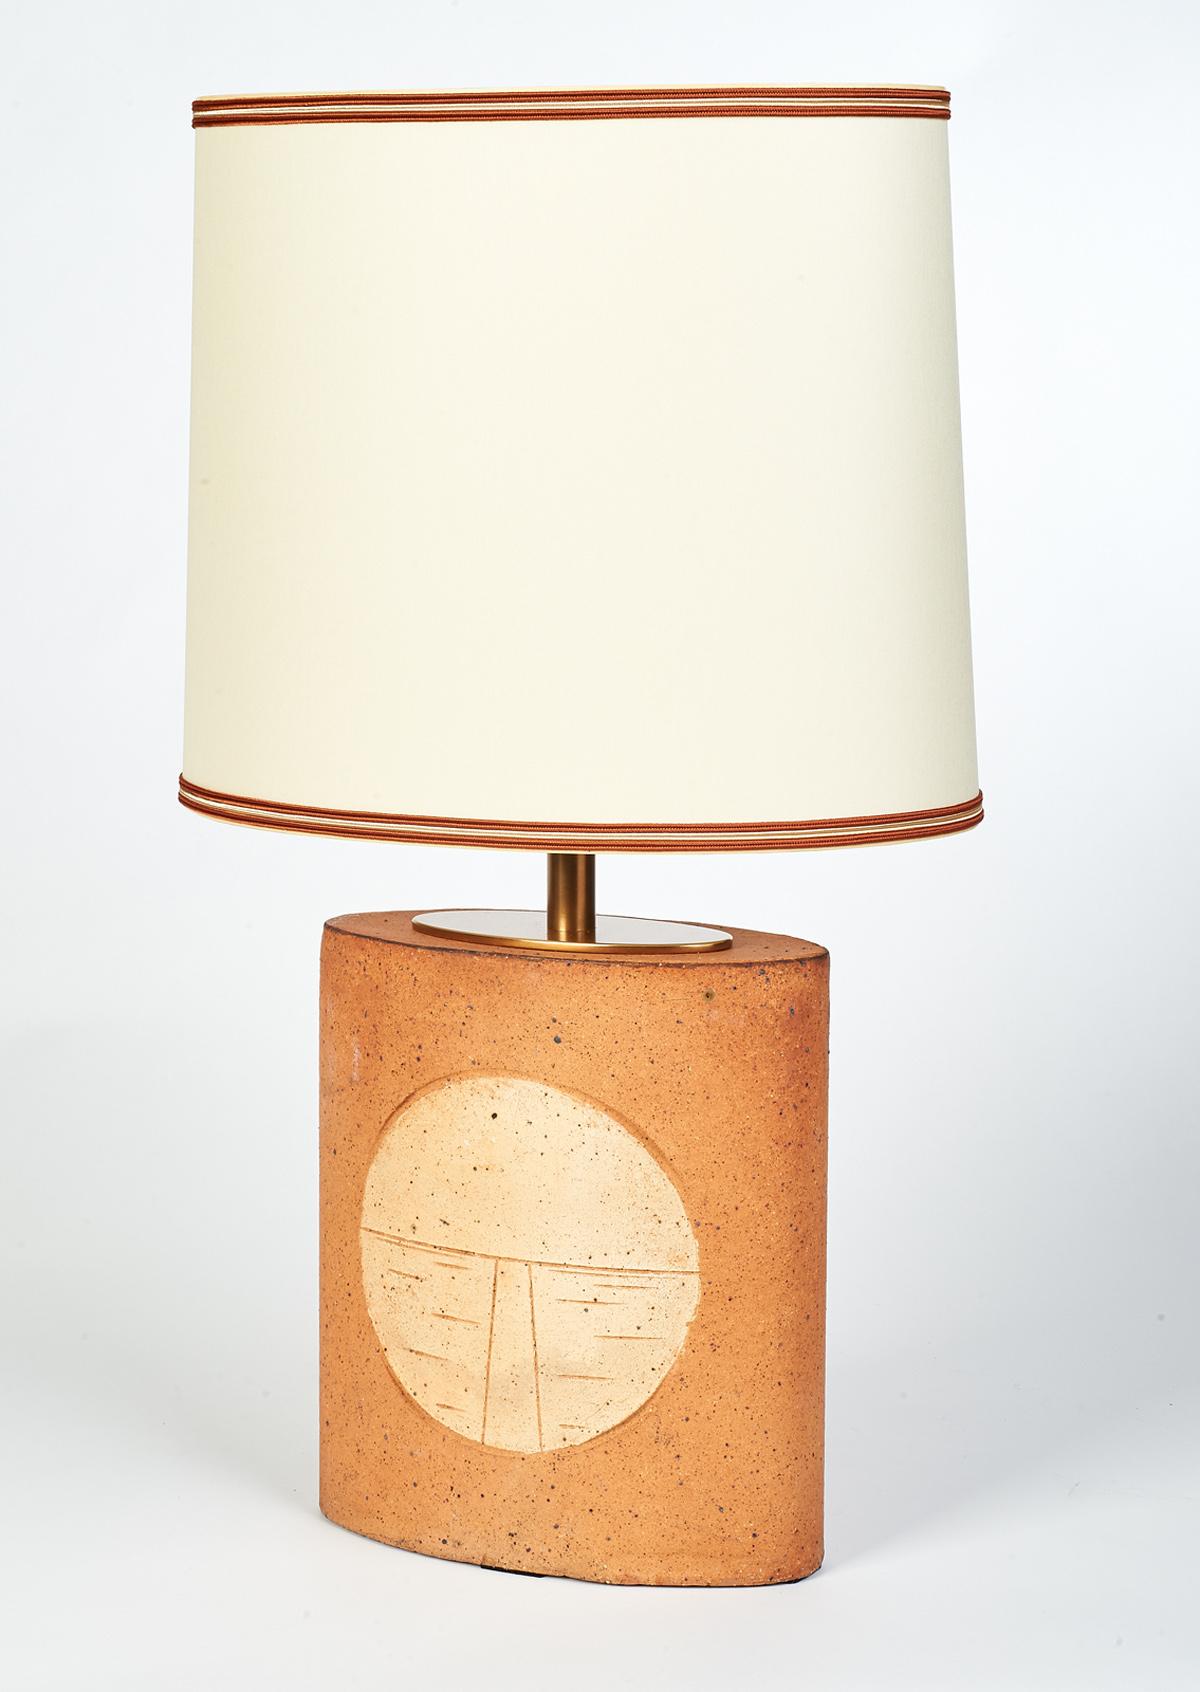 France, 1970s
A pair of unglazed oval ceramic table lamps incised with abstract geometric motifs.
The other lamp in the pair is the same model but a different geometric motif  (see last two images)
Sold and priced individually
Dimensions: 23 H x 13